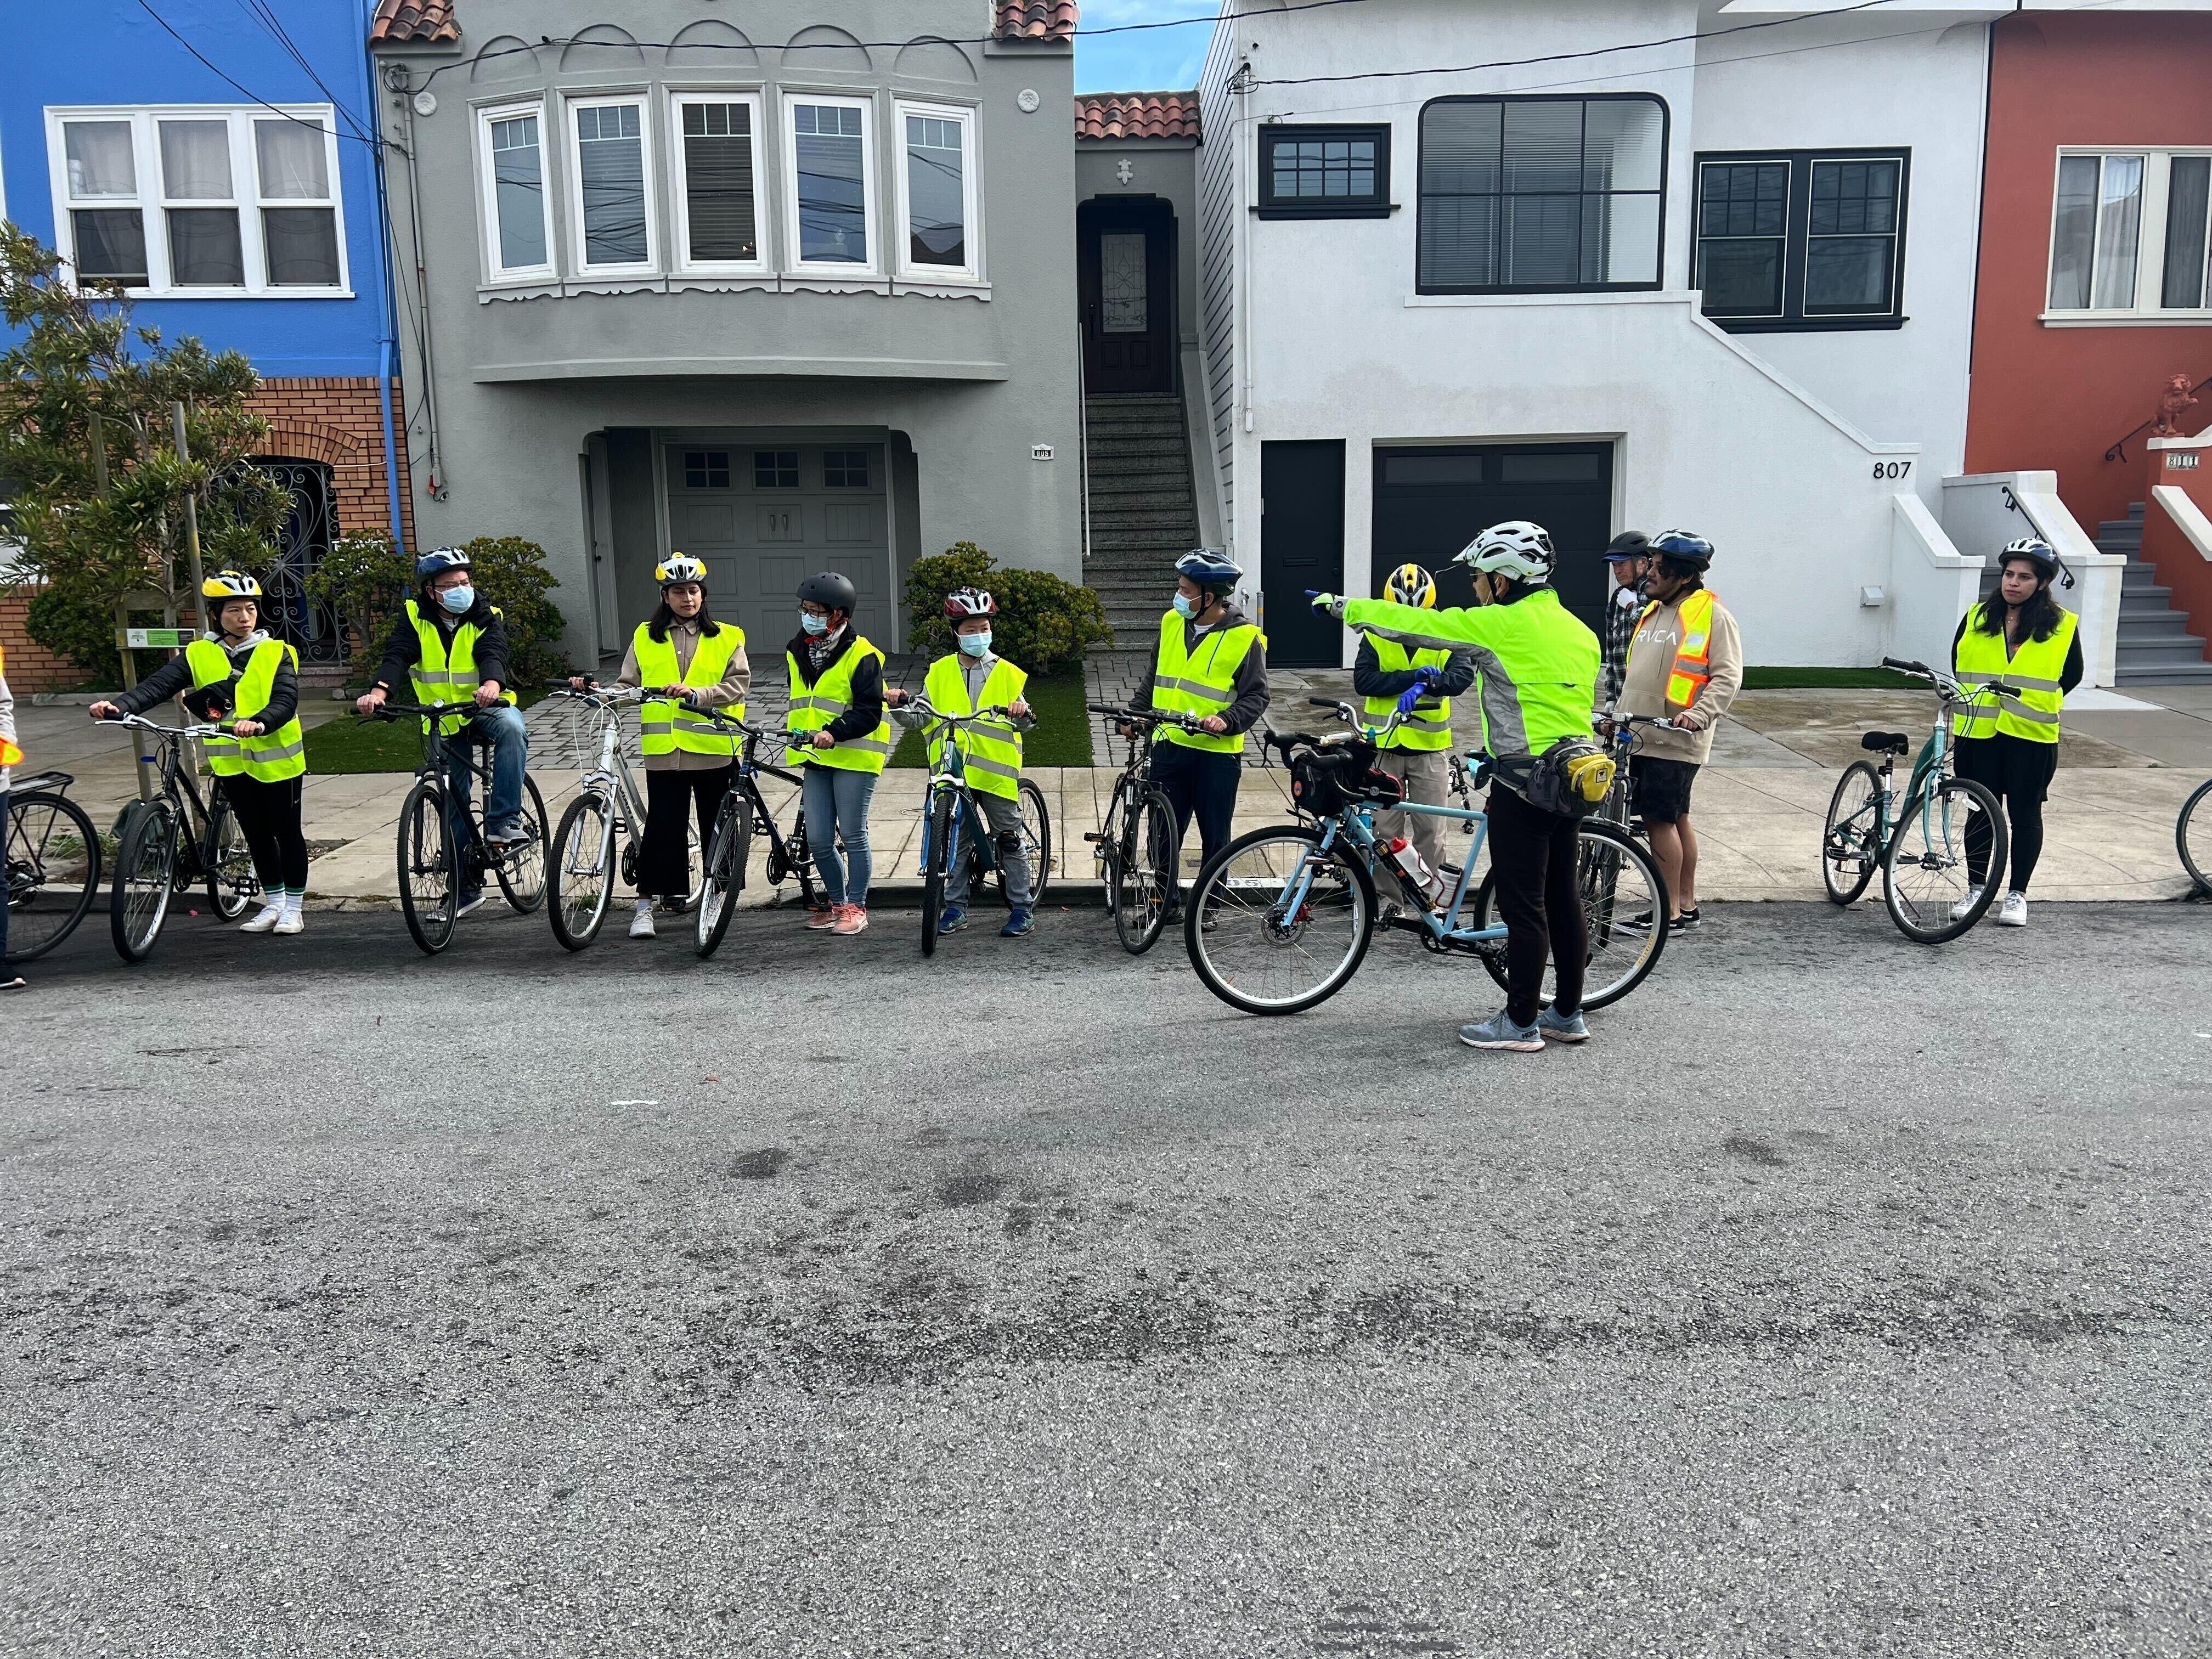 A group of bicyclists are lined up along the curb, all wearing reflective vests.